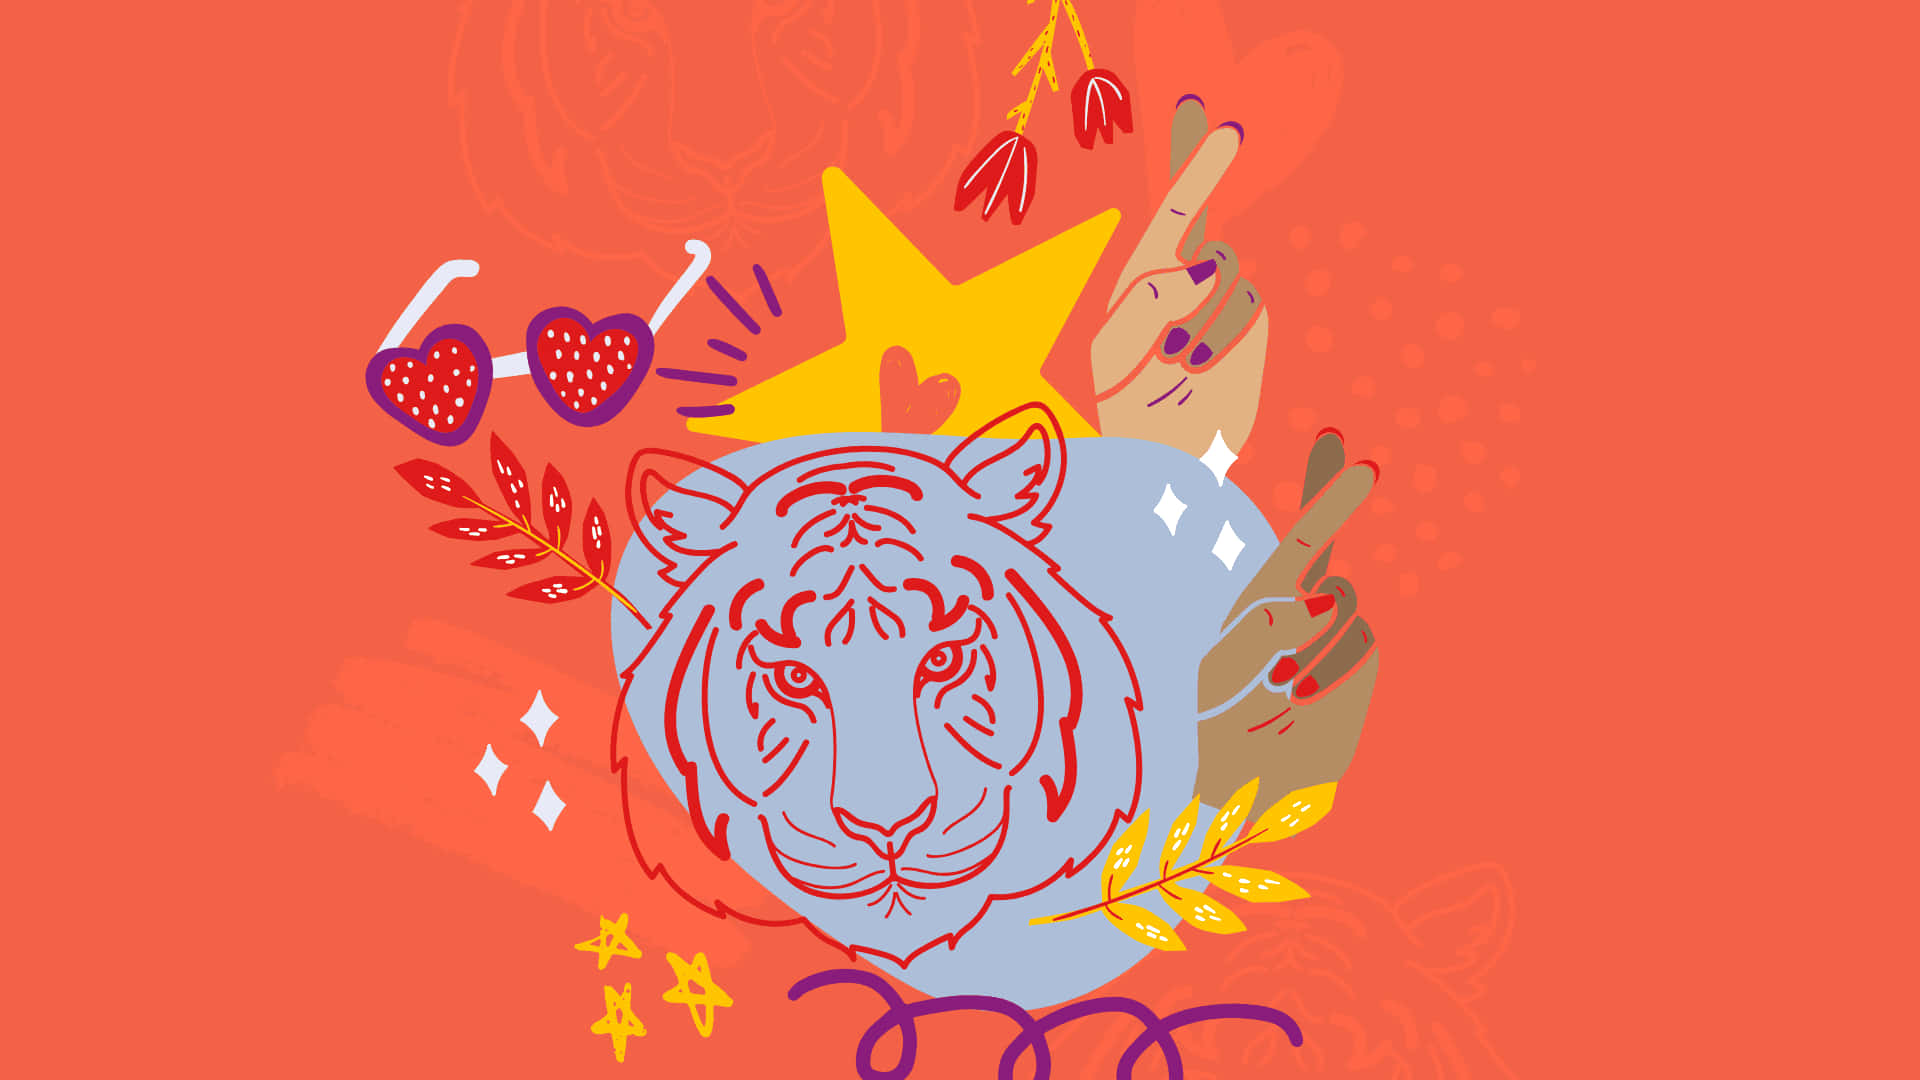 A Tiger With A Heart And Other Symbols Wallpaper